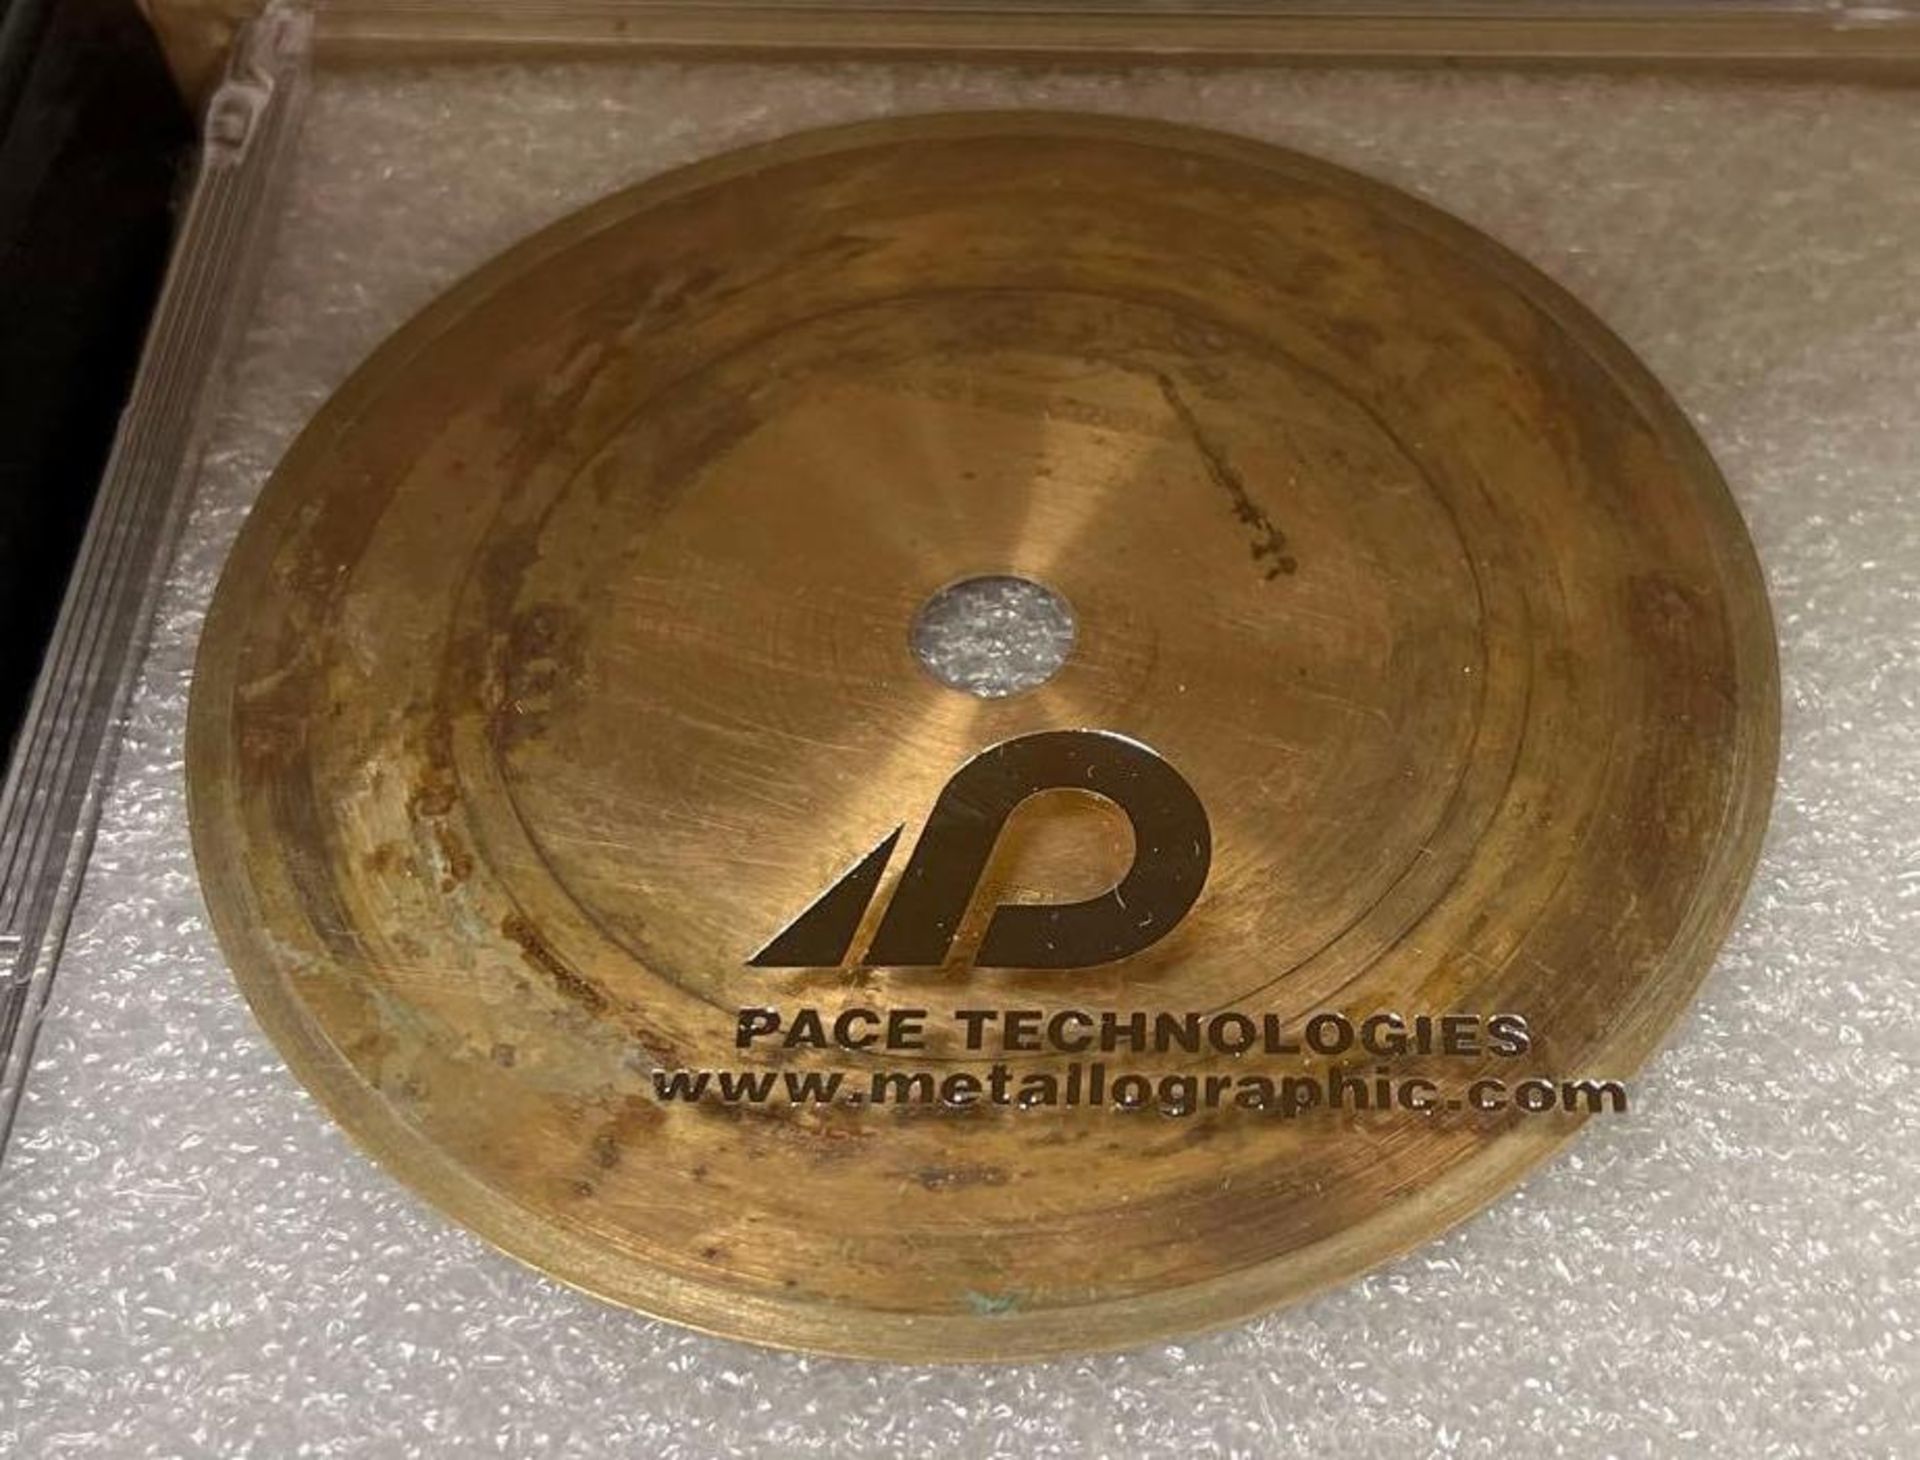 Lot of (4) 5 inch Pace Technologies Diamond Wafering Blades - Image 2 of 3